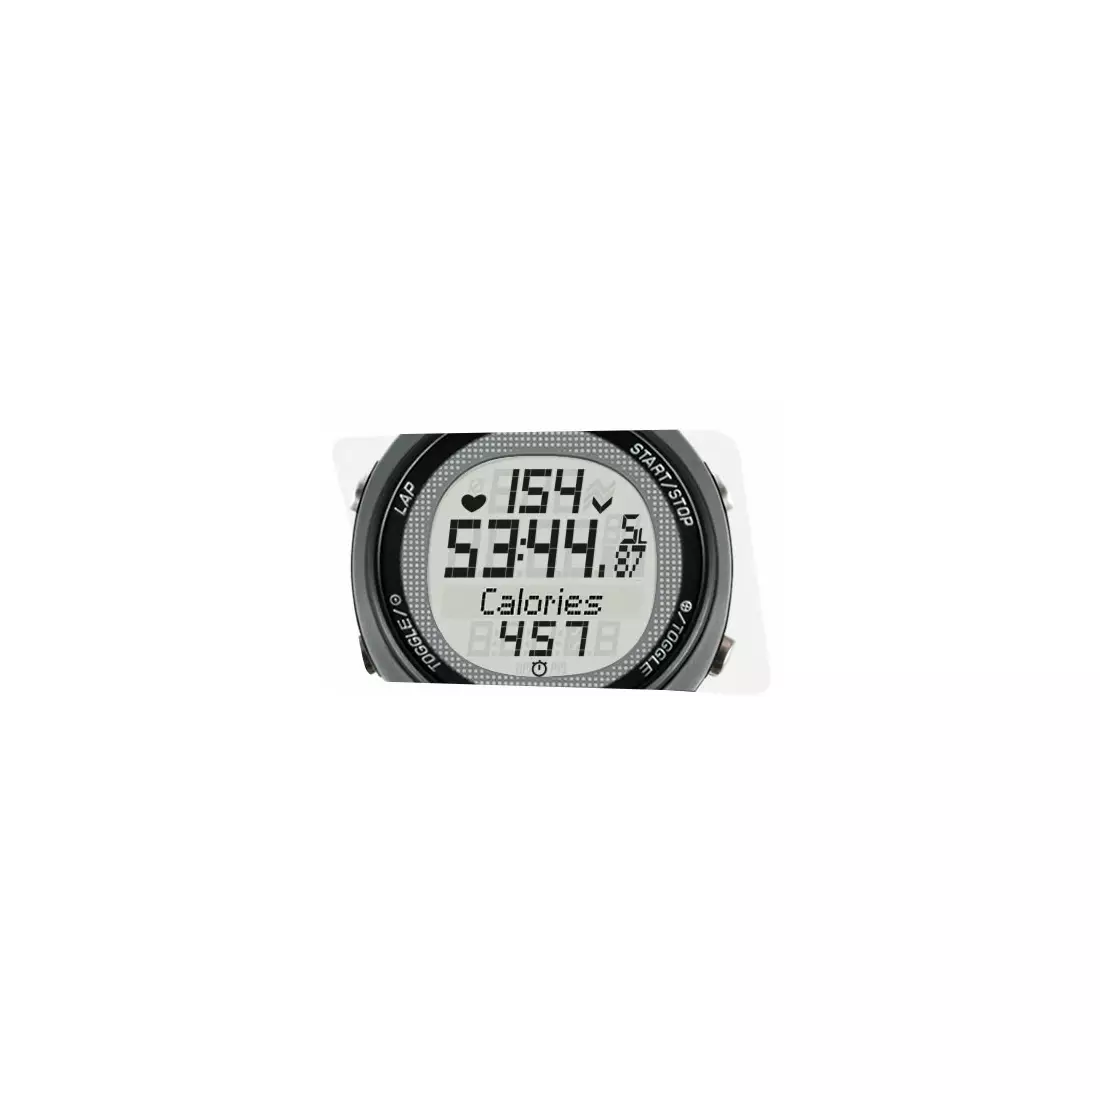 SIGMA 15.11 heart rate monitor with a band, blue